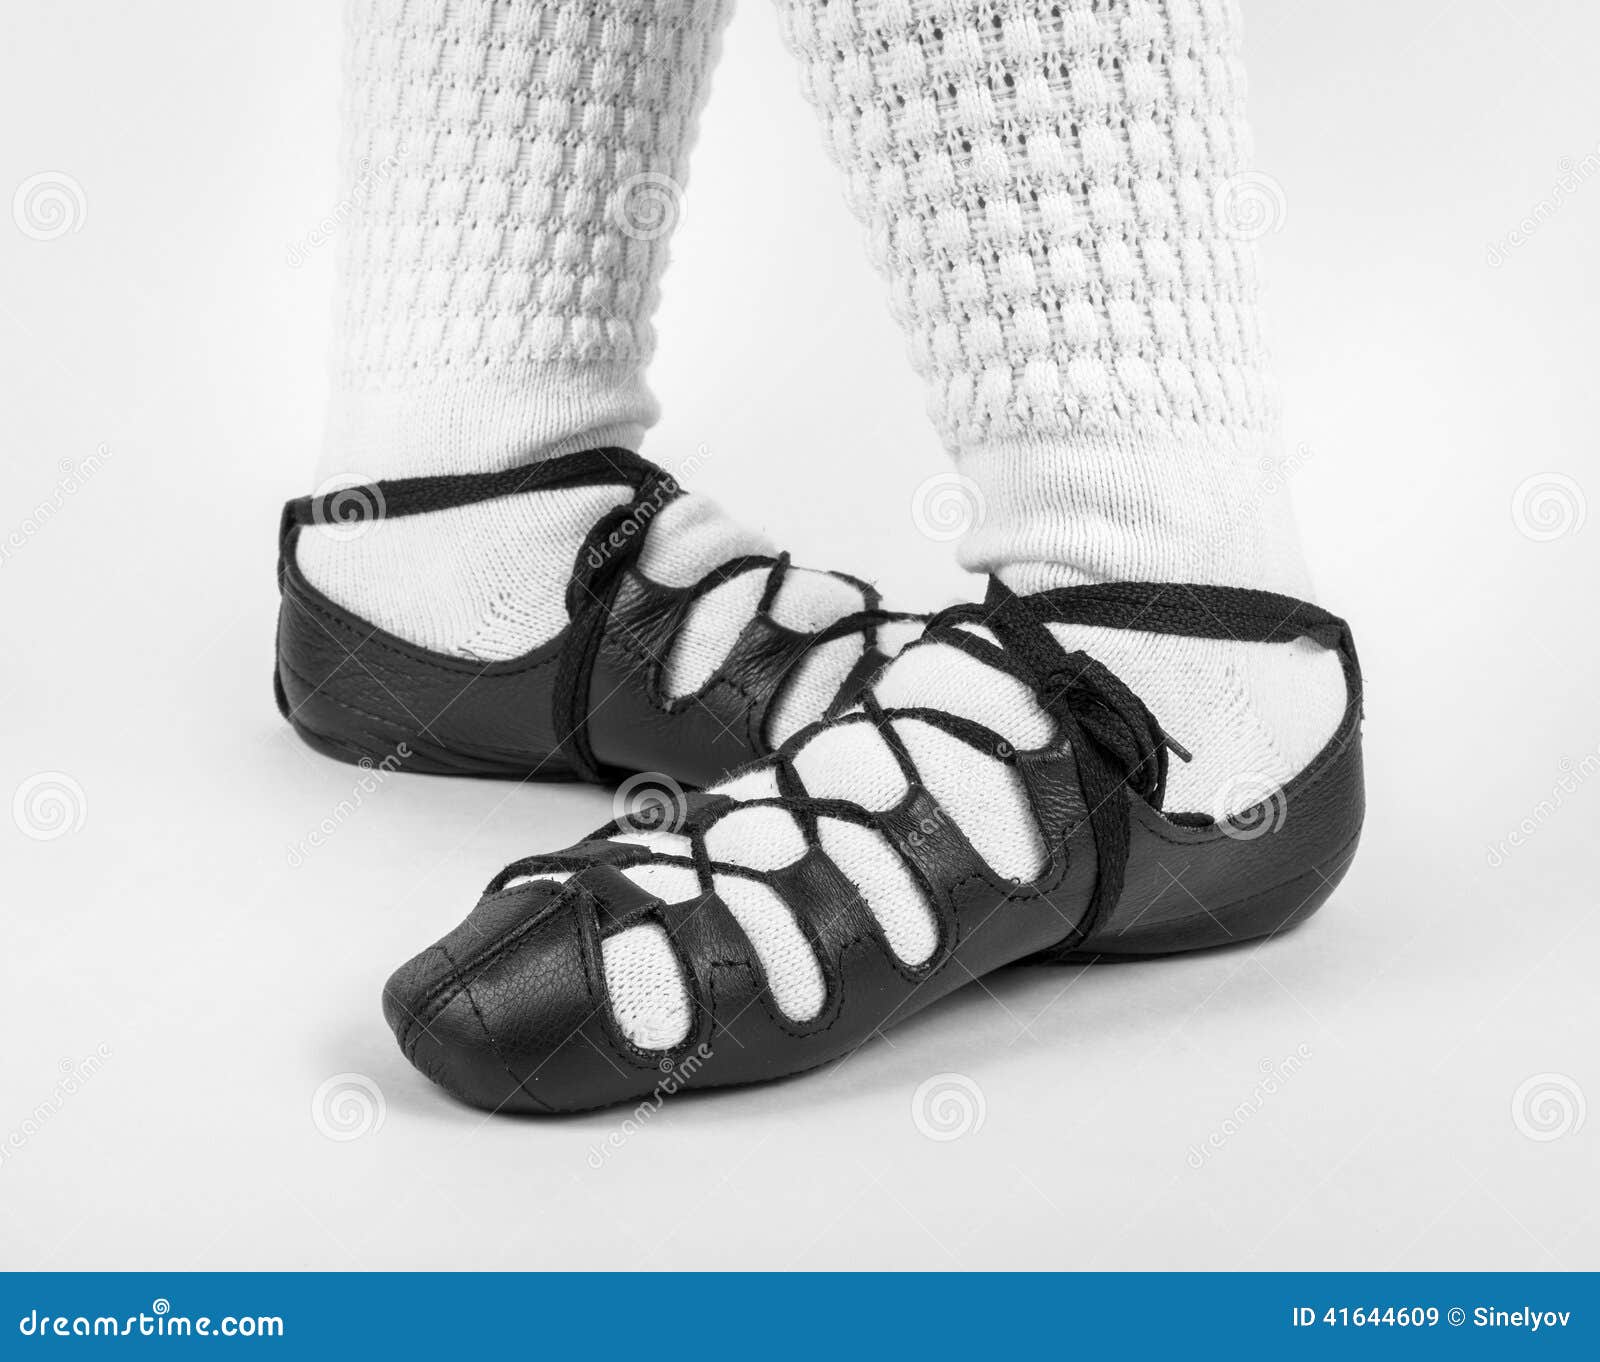 Feet in turnout position stock image. Image of softshoes - 41644609